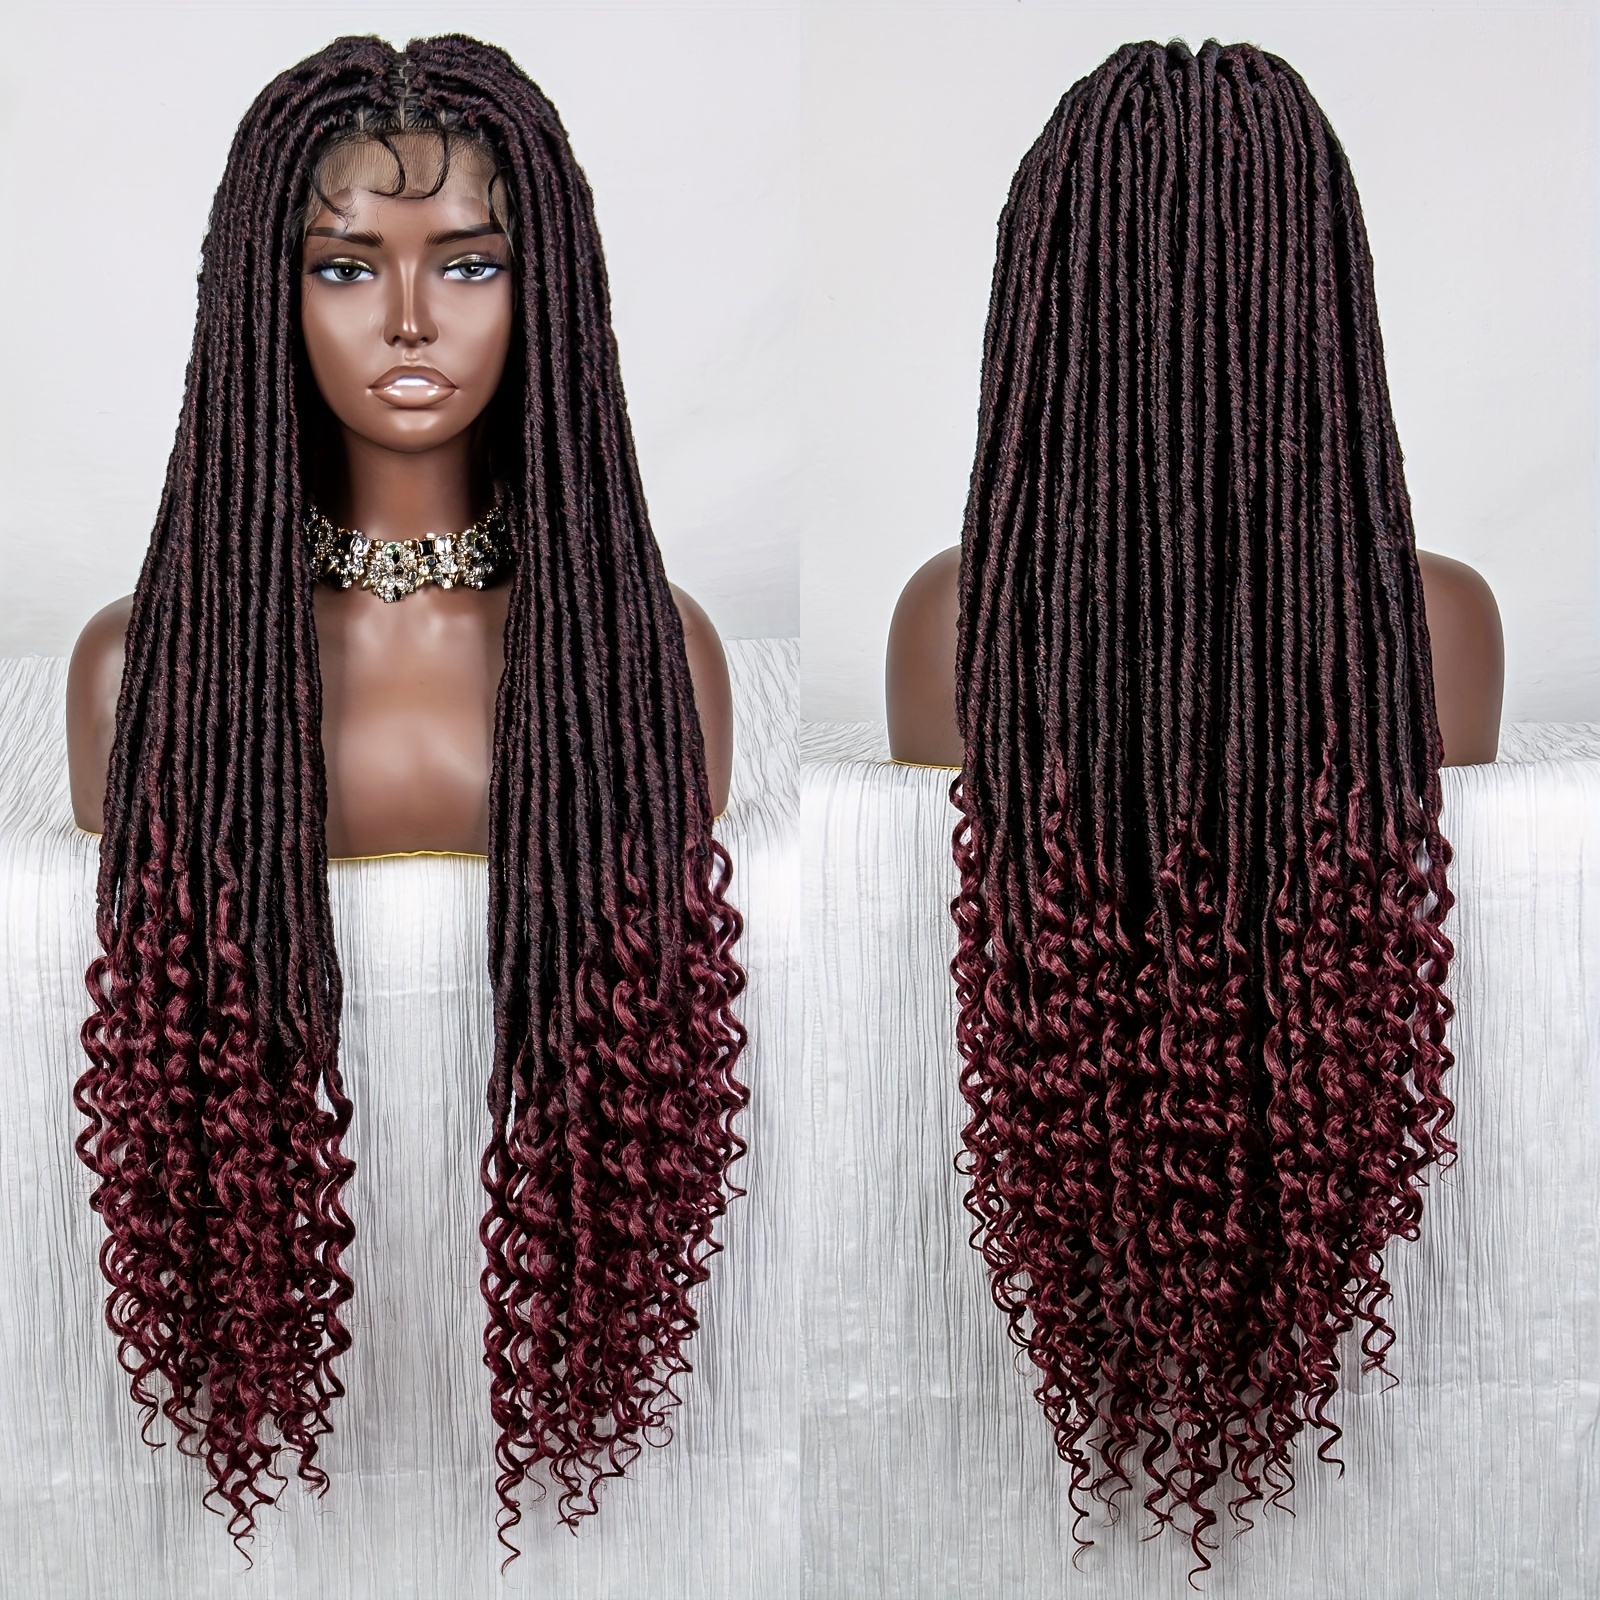 Knotless Braided Wig for Black Women Ombre Burgundy Full Lace